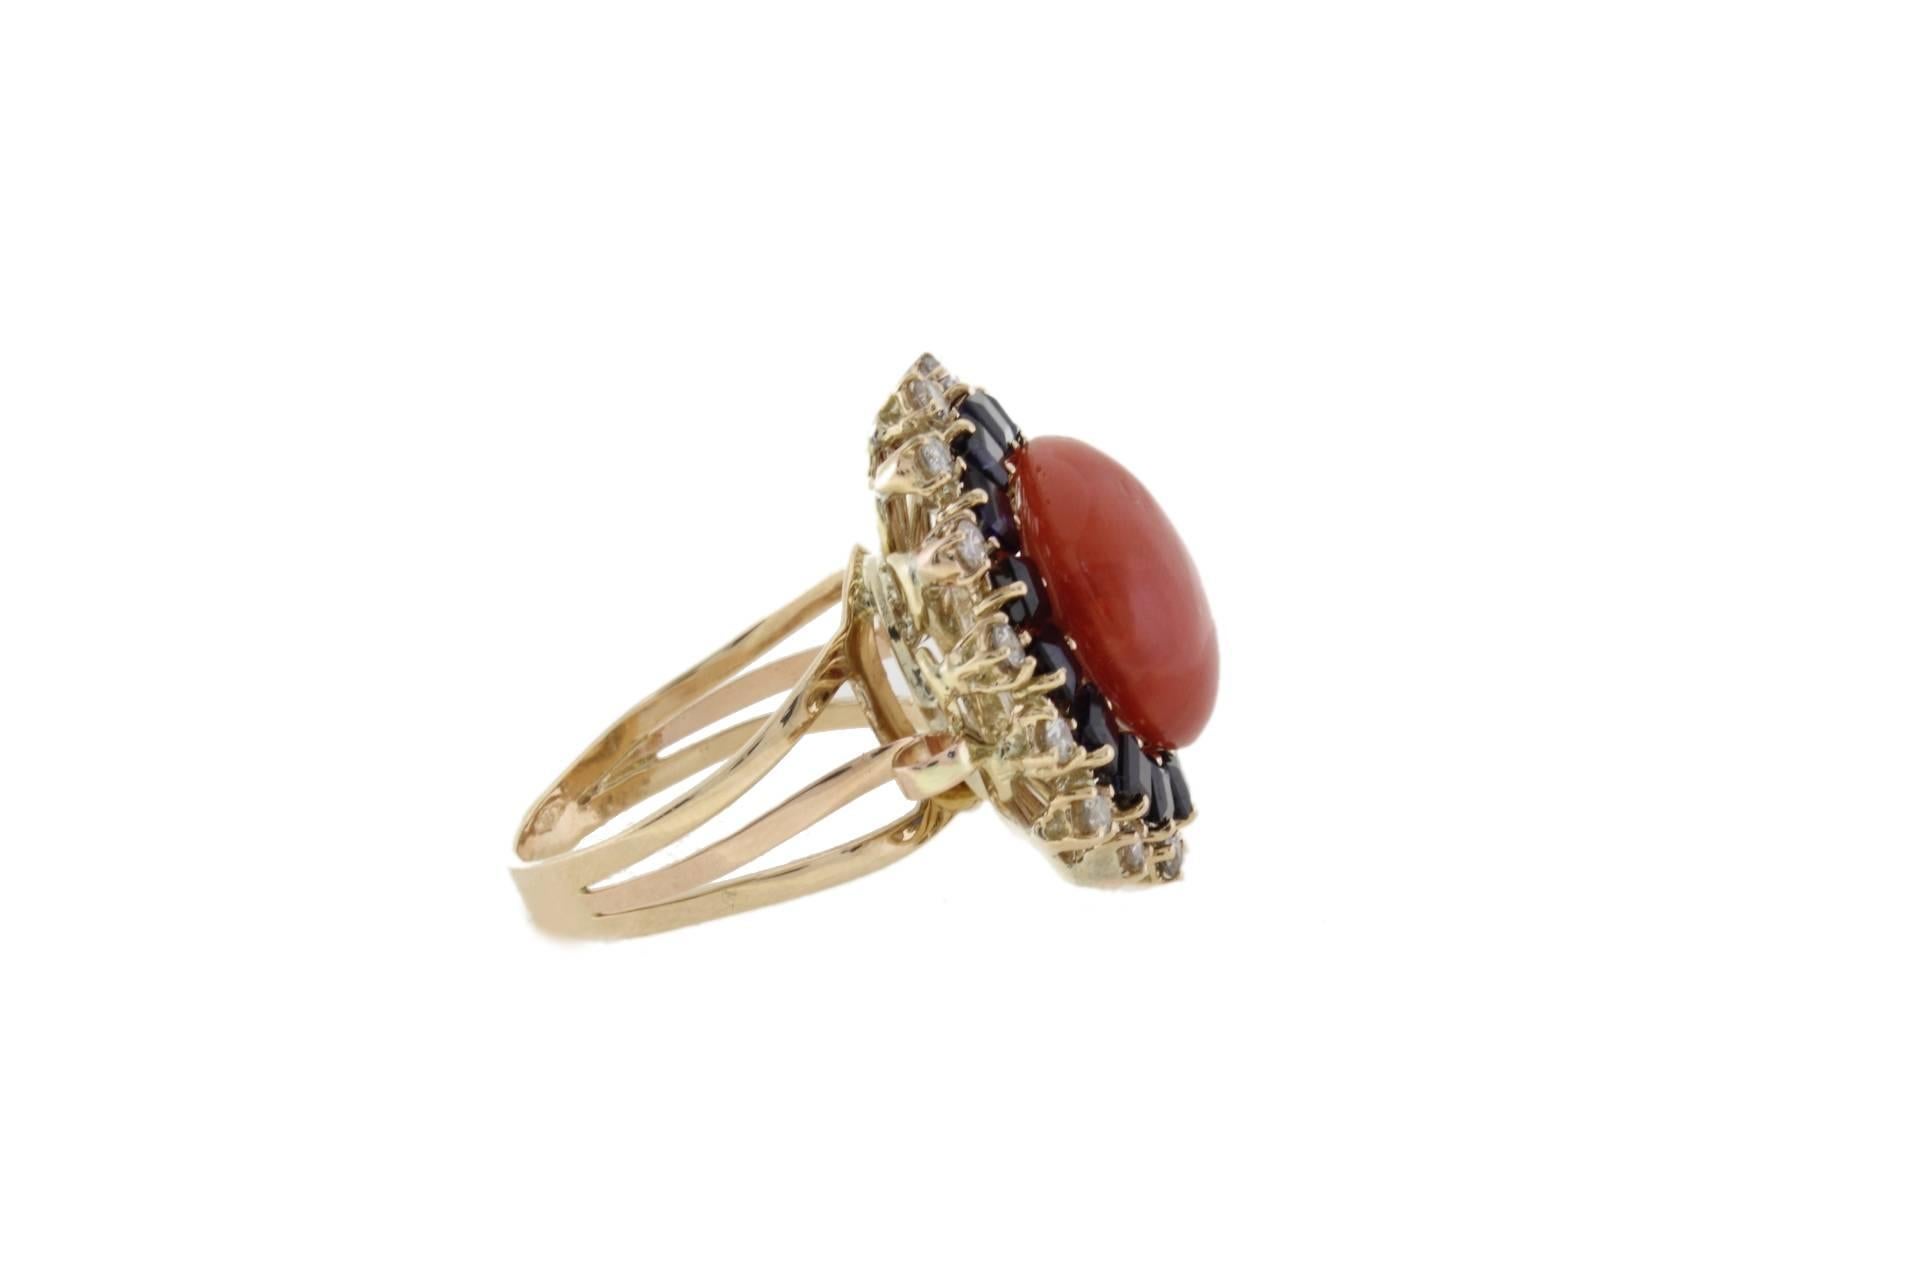 Cluster Ring in 14k yellow and rose gold composed of one diamonds crown, one blue sapphires crown and coral button in the center.
Diamonds 0.71 kt
Blue Sapphires 2.99 kt
Coral 1.70 gr
Tot.Weight 10.10 gr
R.F uehi